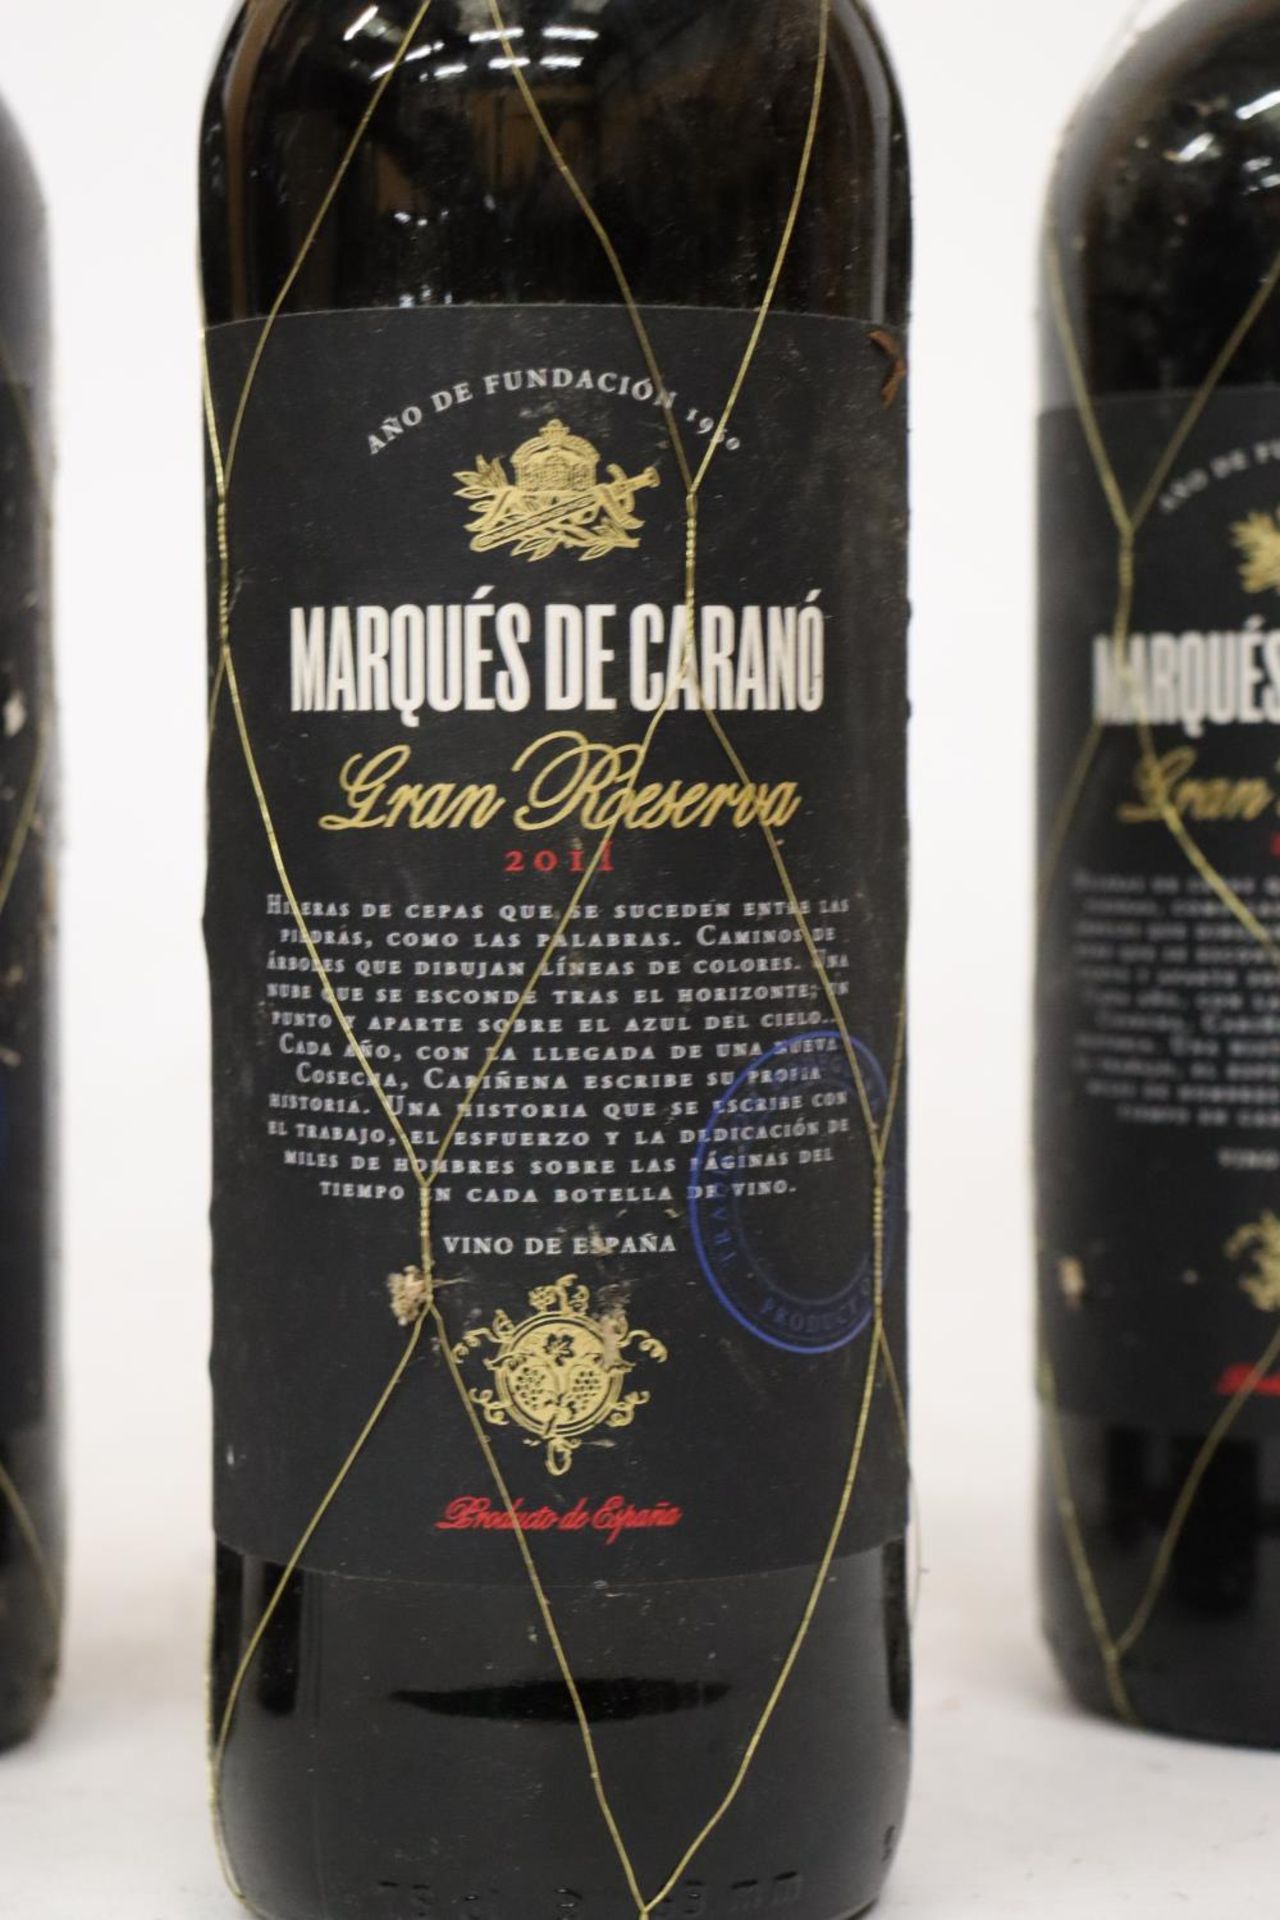 FOUR BOTTLES OF MARQUES DE CARANO GRAN RESERVA 2011 SPANISH RED WINE - Image 2 of 4